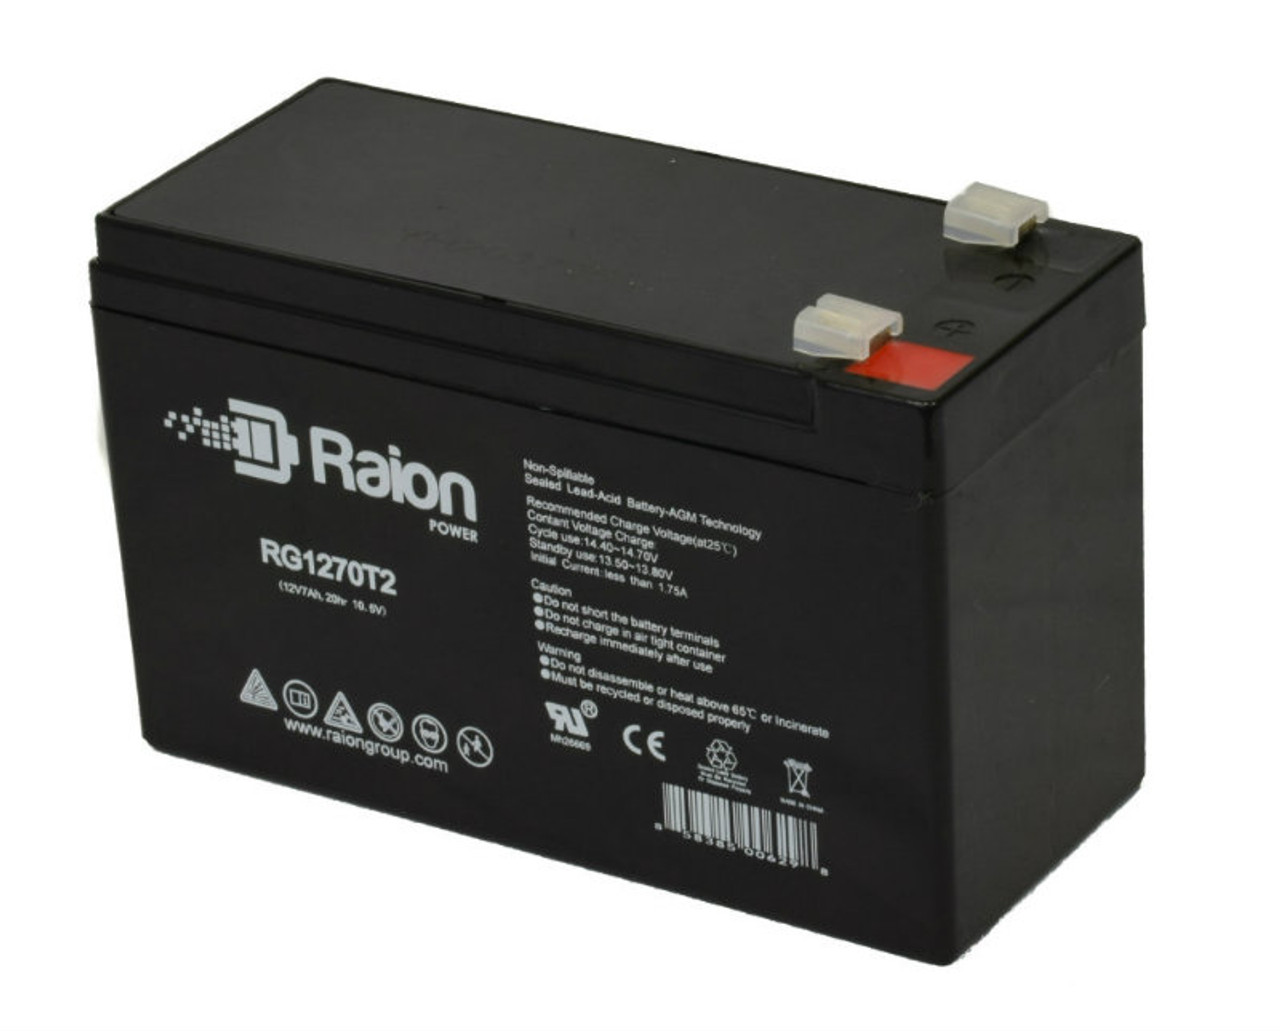 Raion Power Replacement RG1270T1 Battery for Harmar CSL500 Helix Curved Stairlift